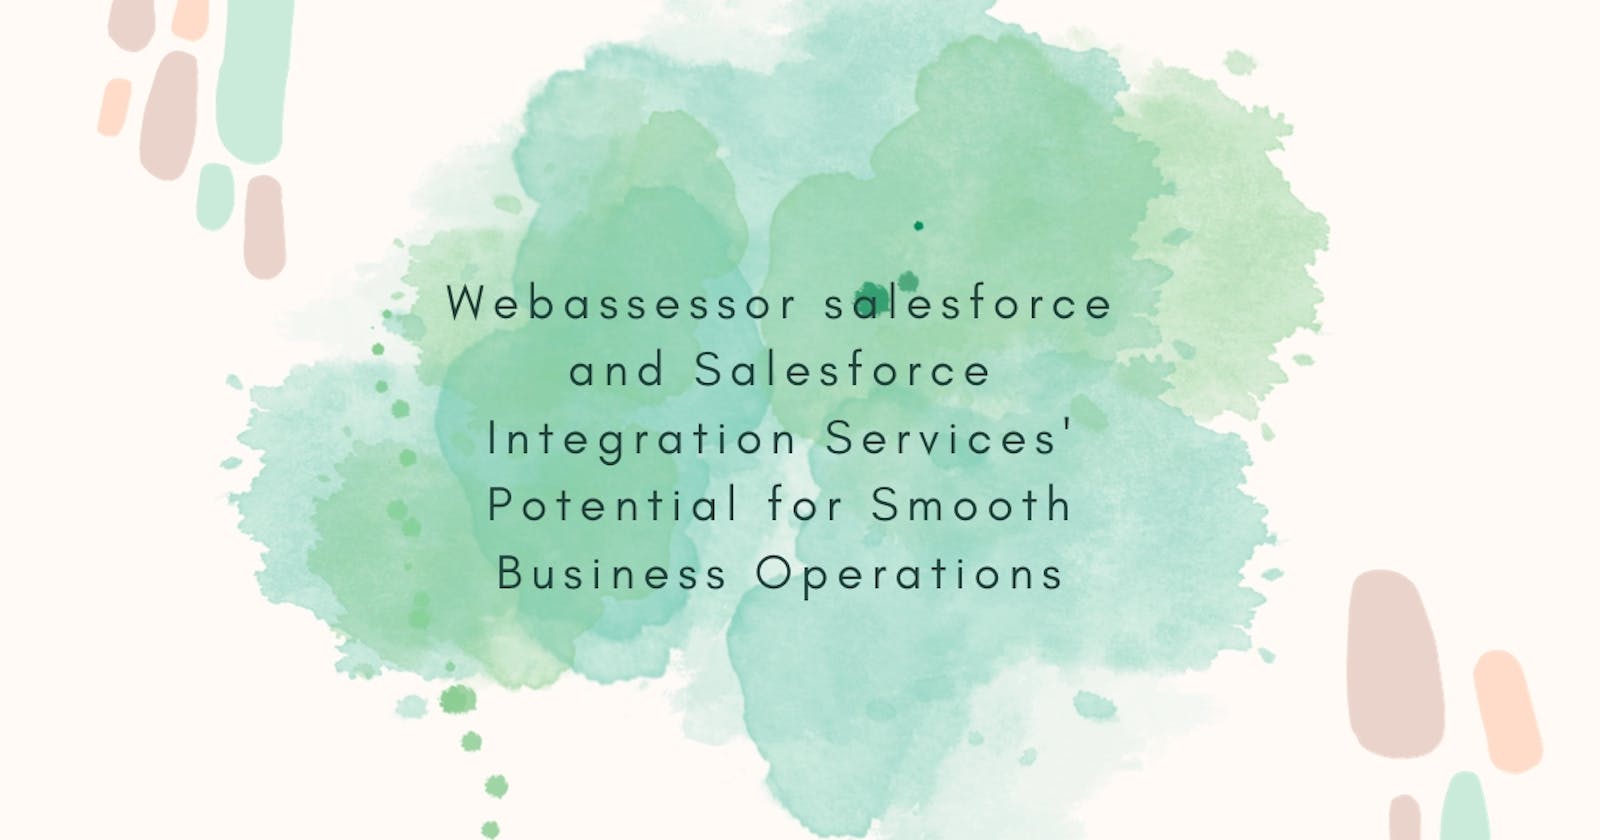 Webassessor salesforce and Salesforce Integration Services' Potential for Smooth Business Operations